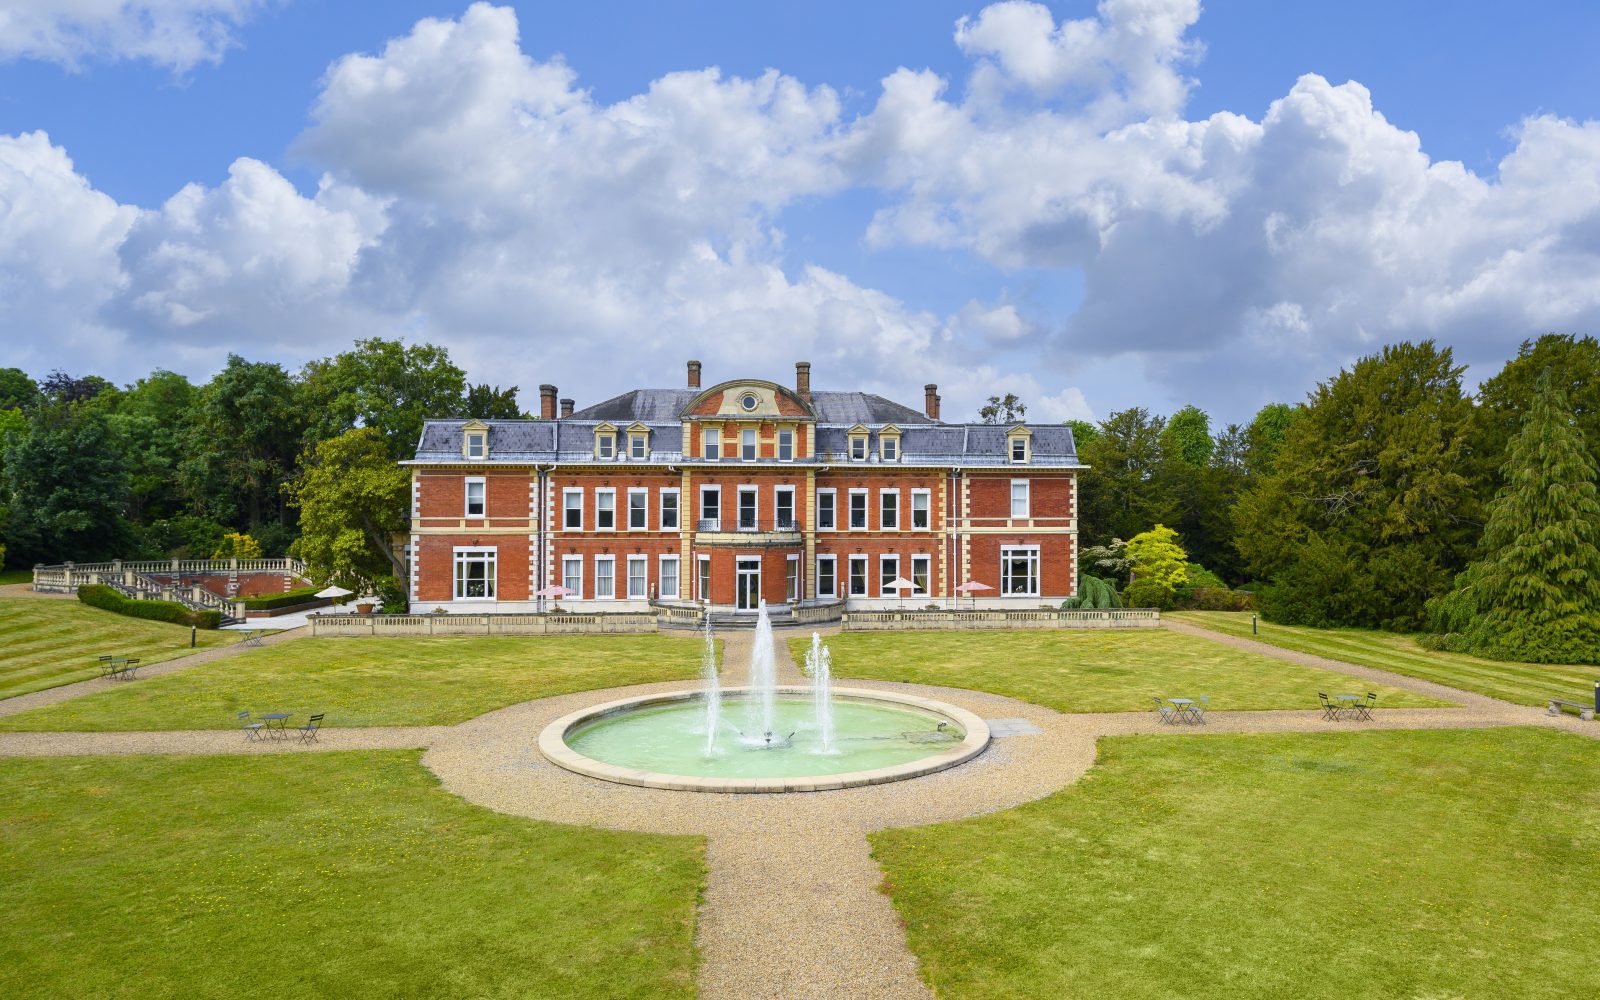 The landscaped gardens and fountains at Fetcham Park